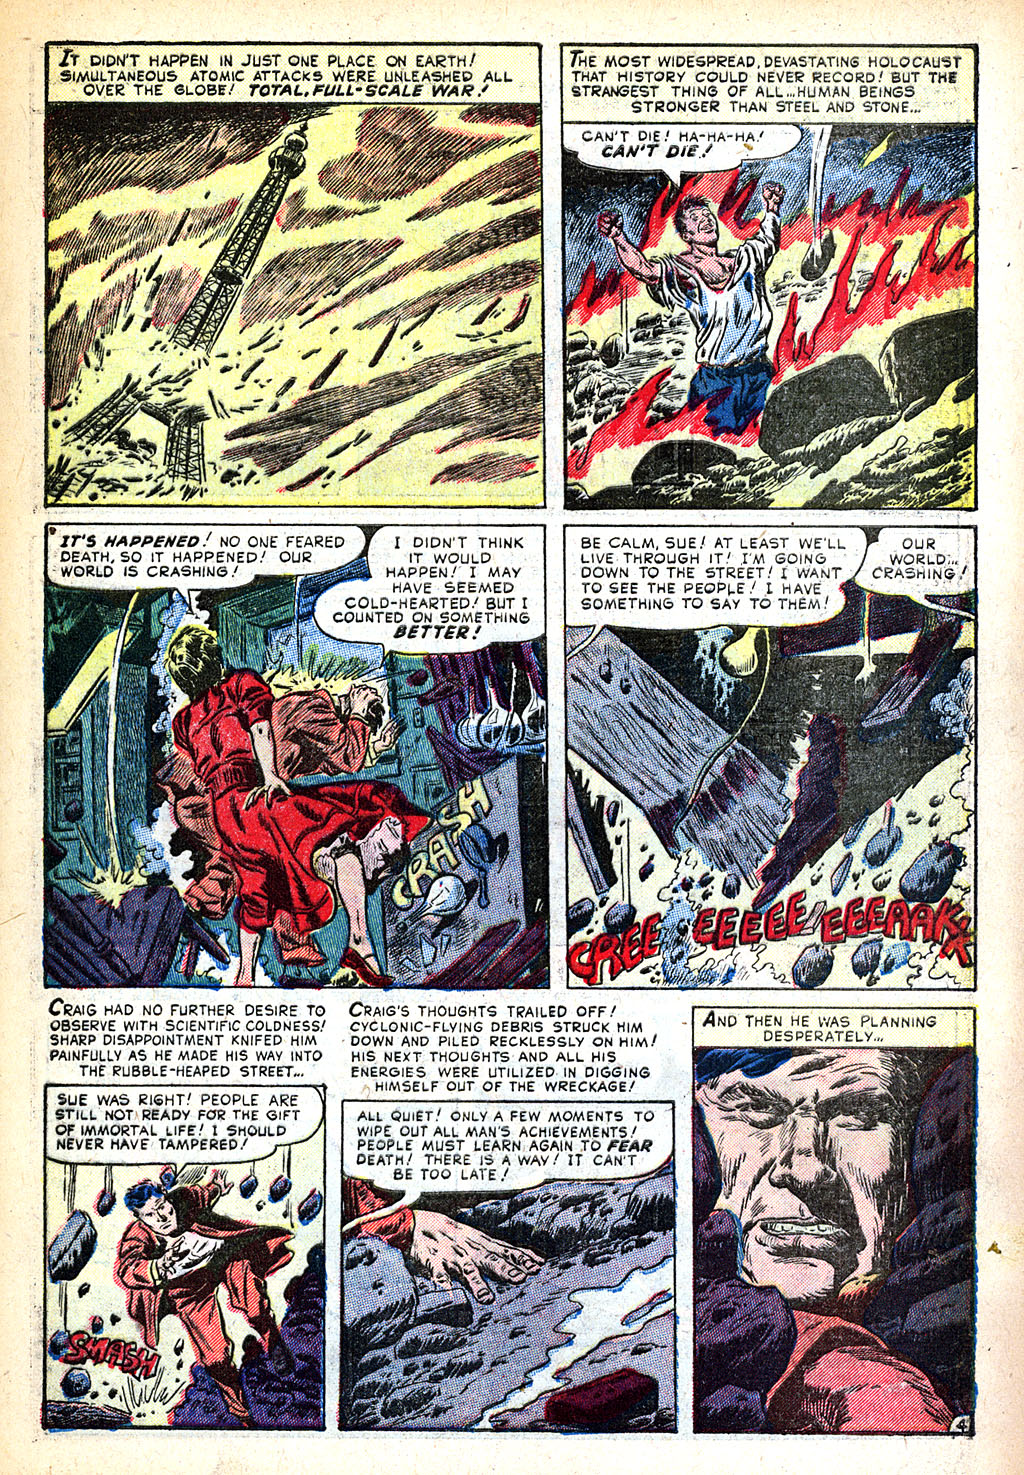 Marvel Tales (1949) 118 Page 30